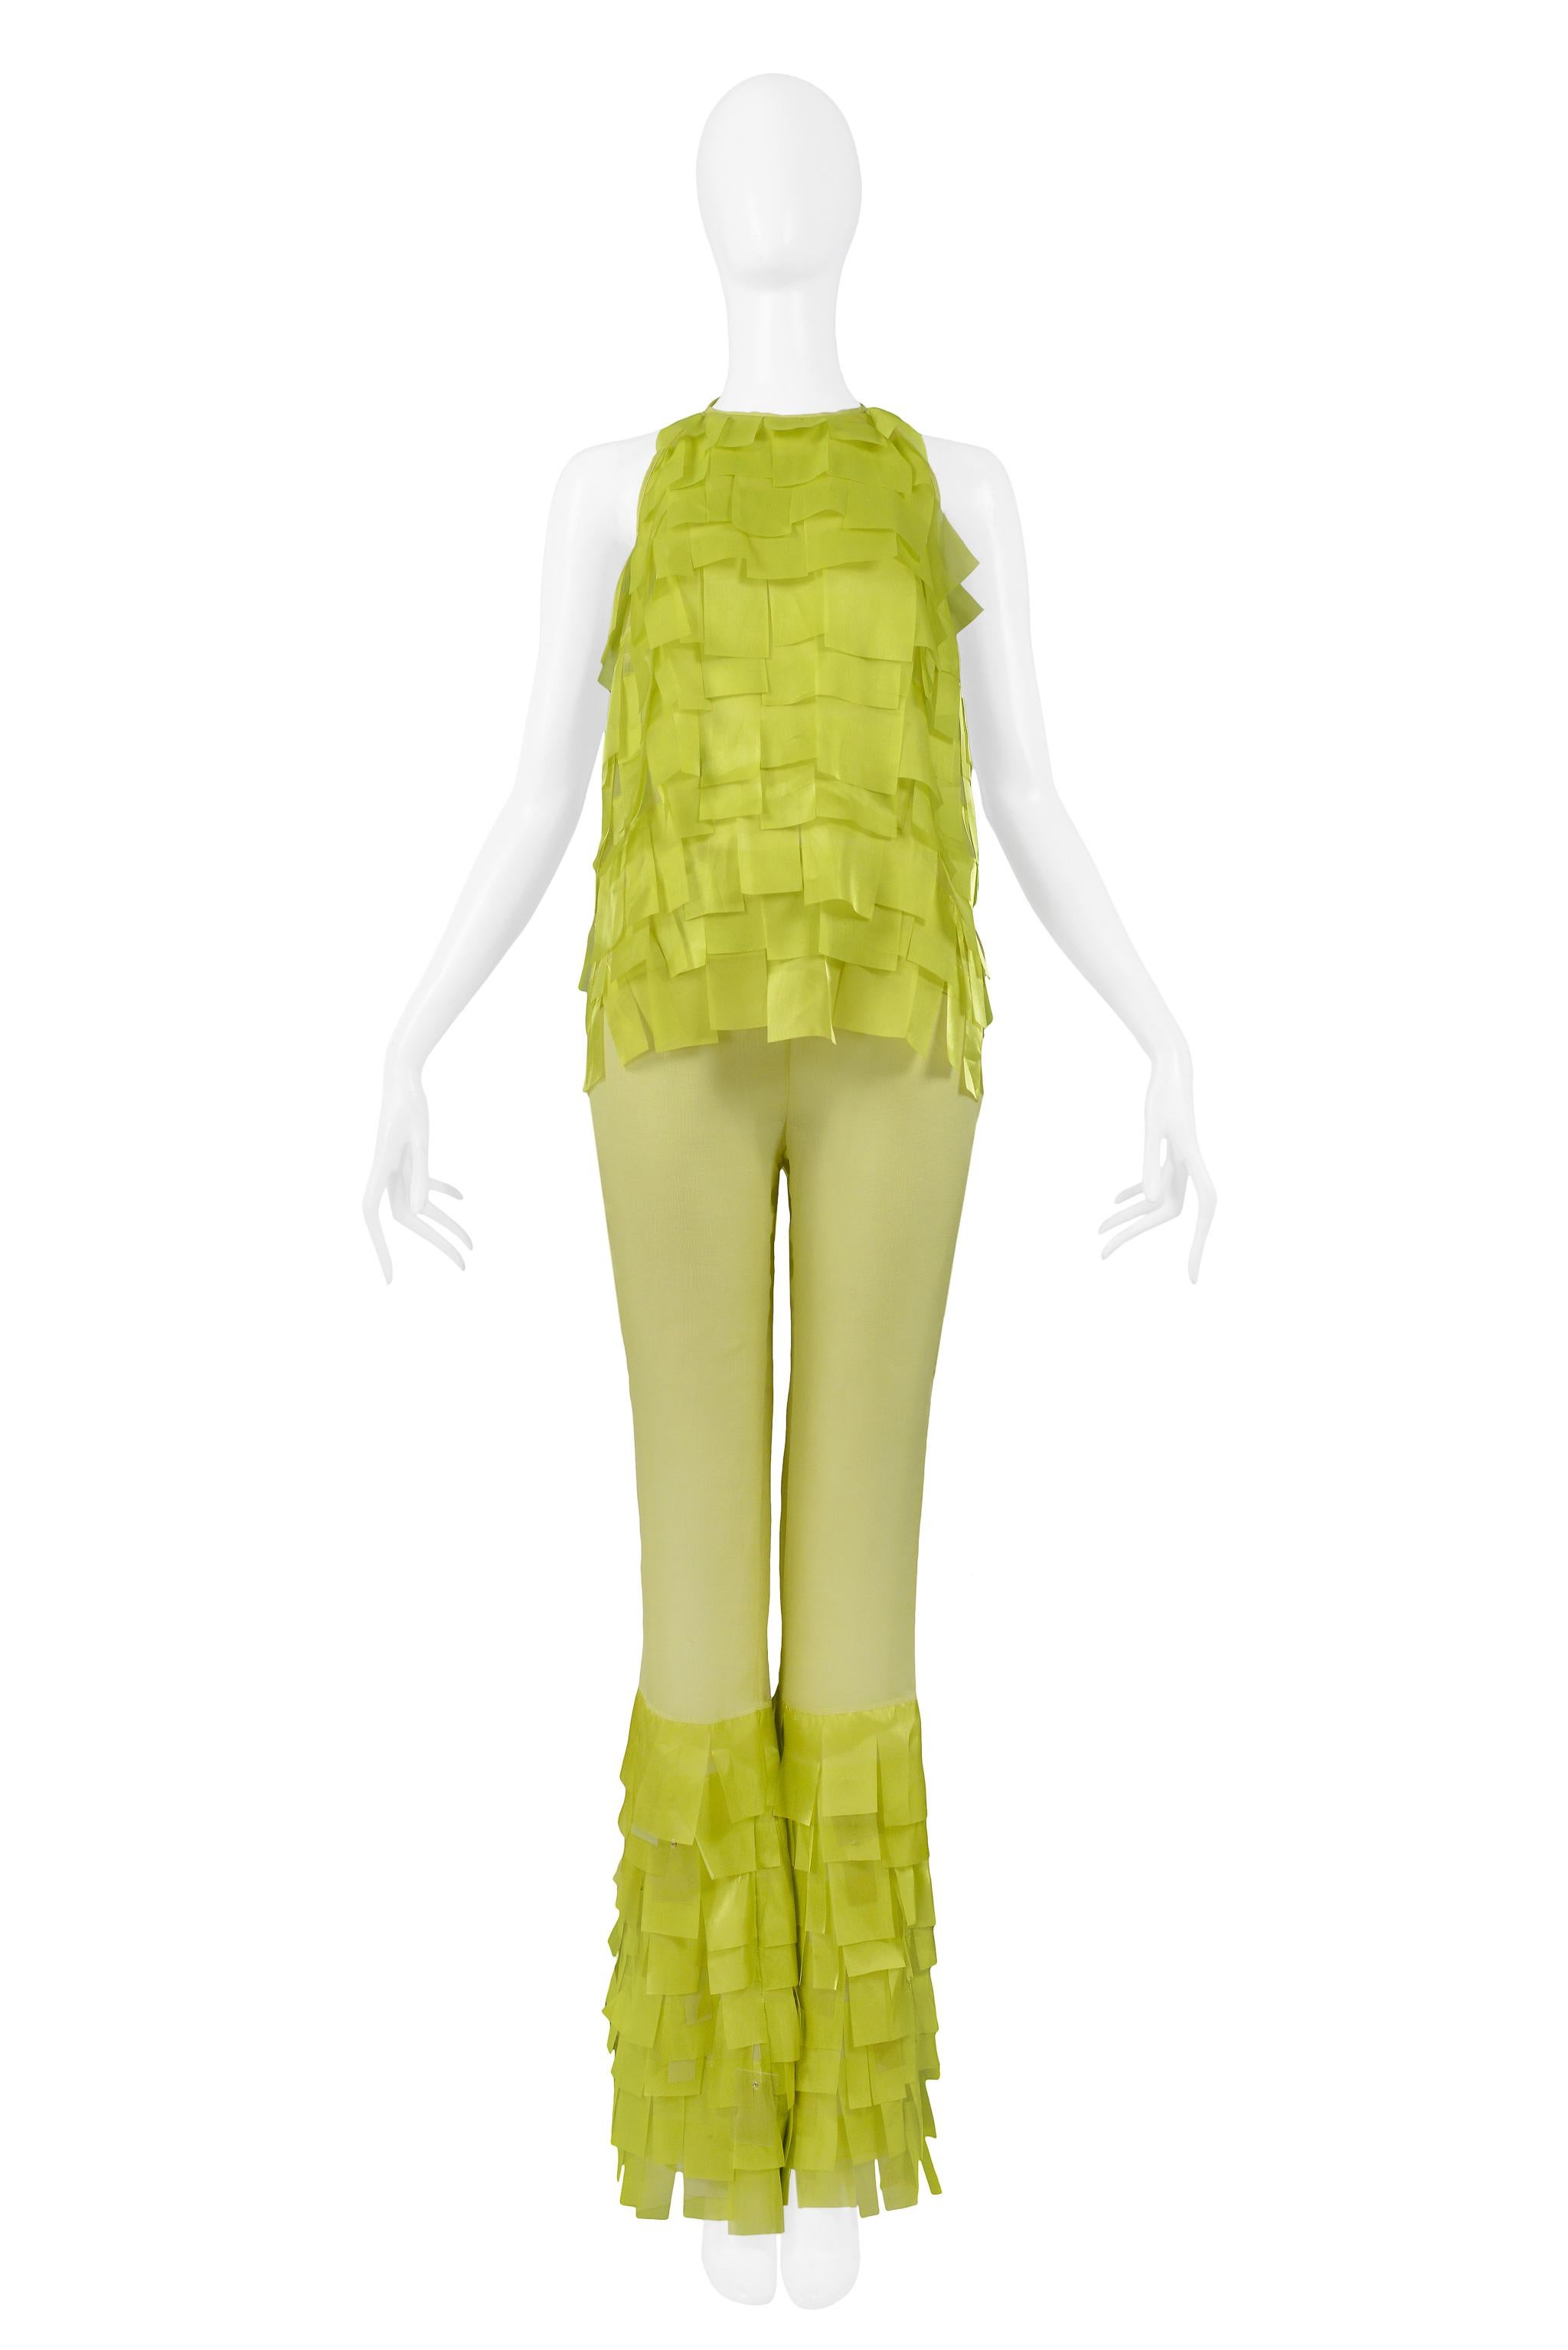 Resurrection Vintage is pleased to offer a vintage Paco Rabanne chartreuse green ensemble with tie back halter top and bell-bottom pants made of silk and embellished with layered vinyl fringe. Collection SS 2001.

Paco Rabanne 
Size Top 40, Pants